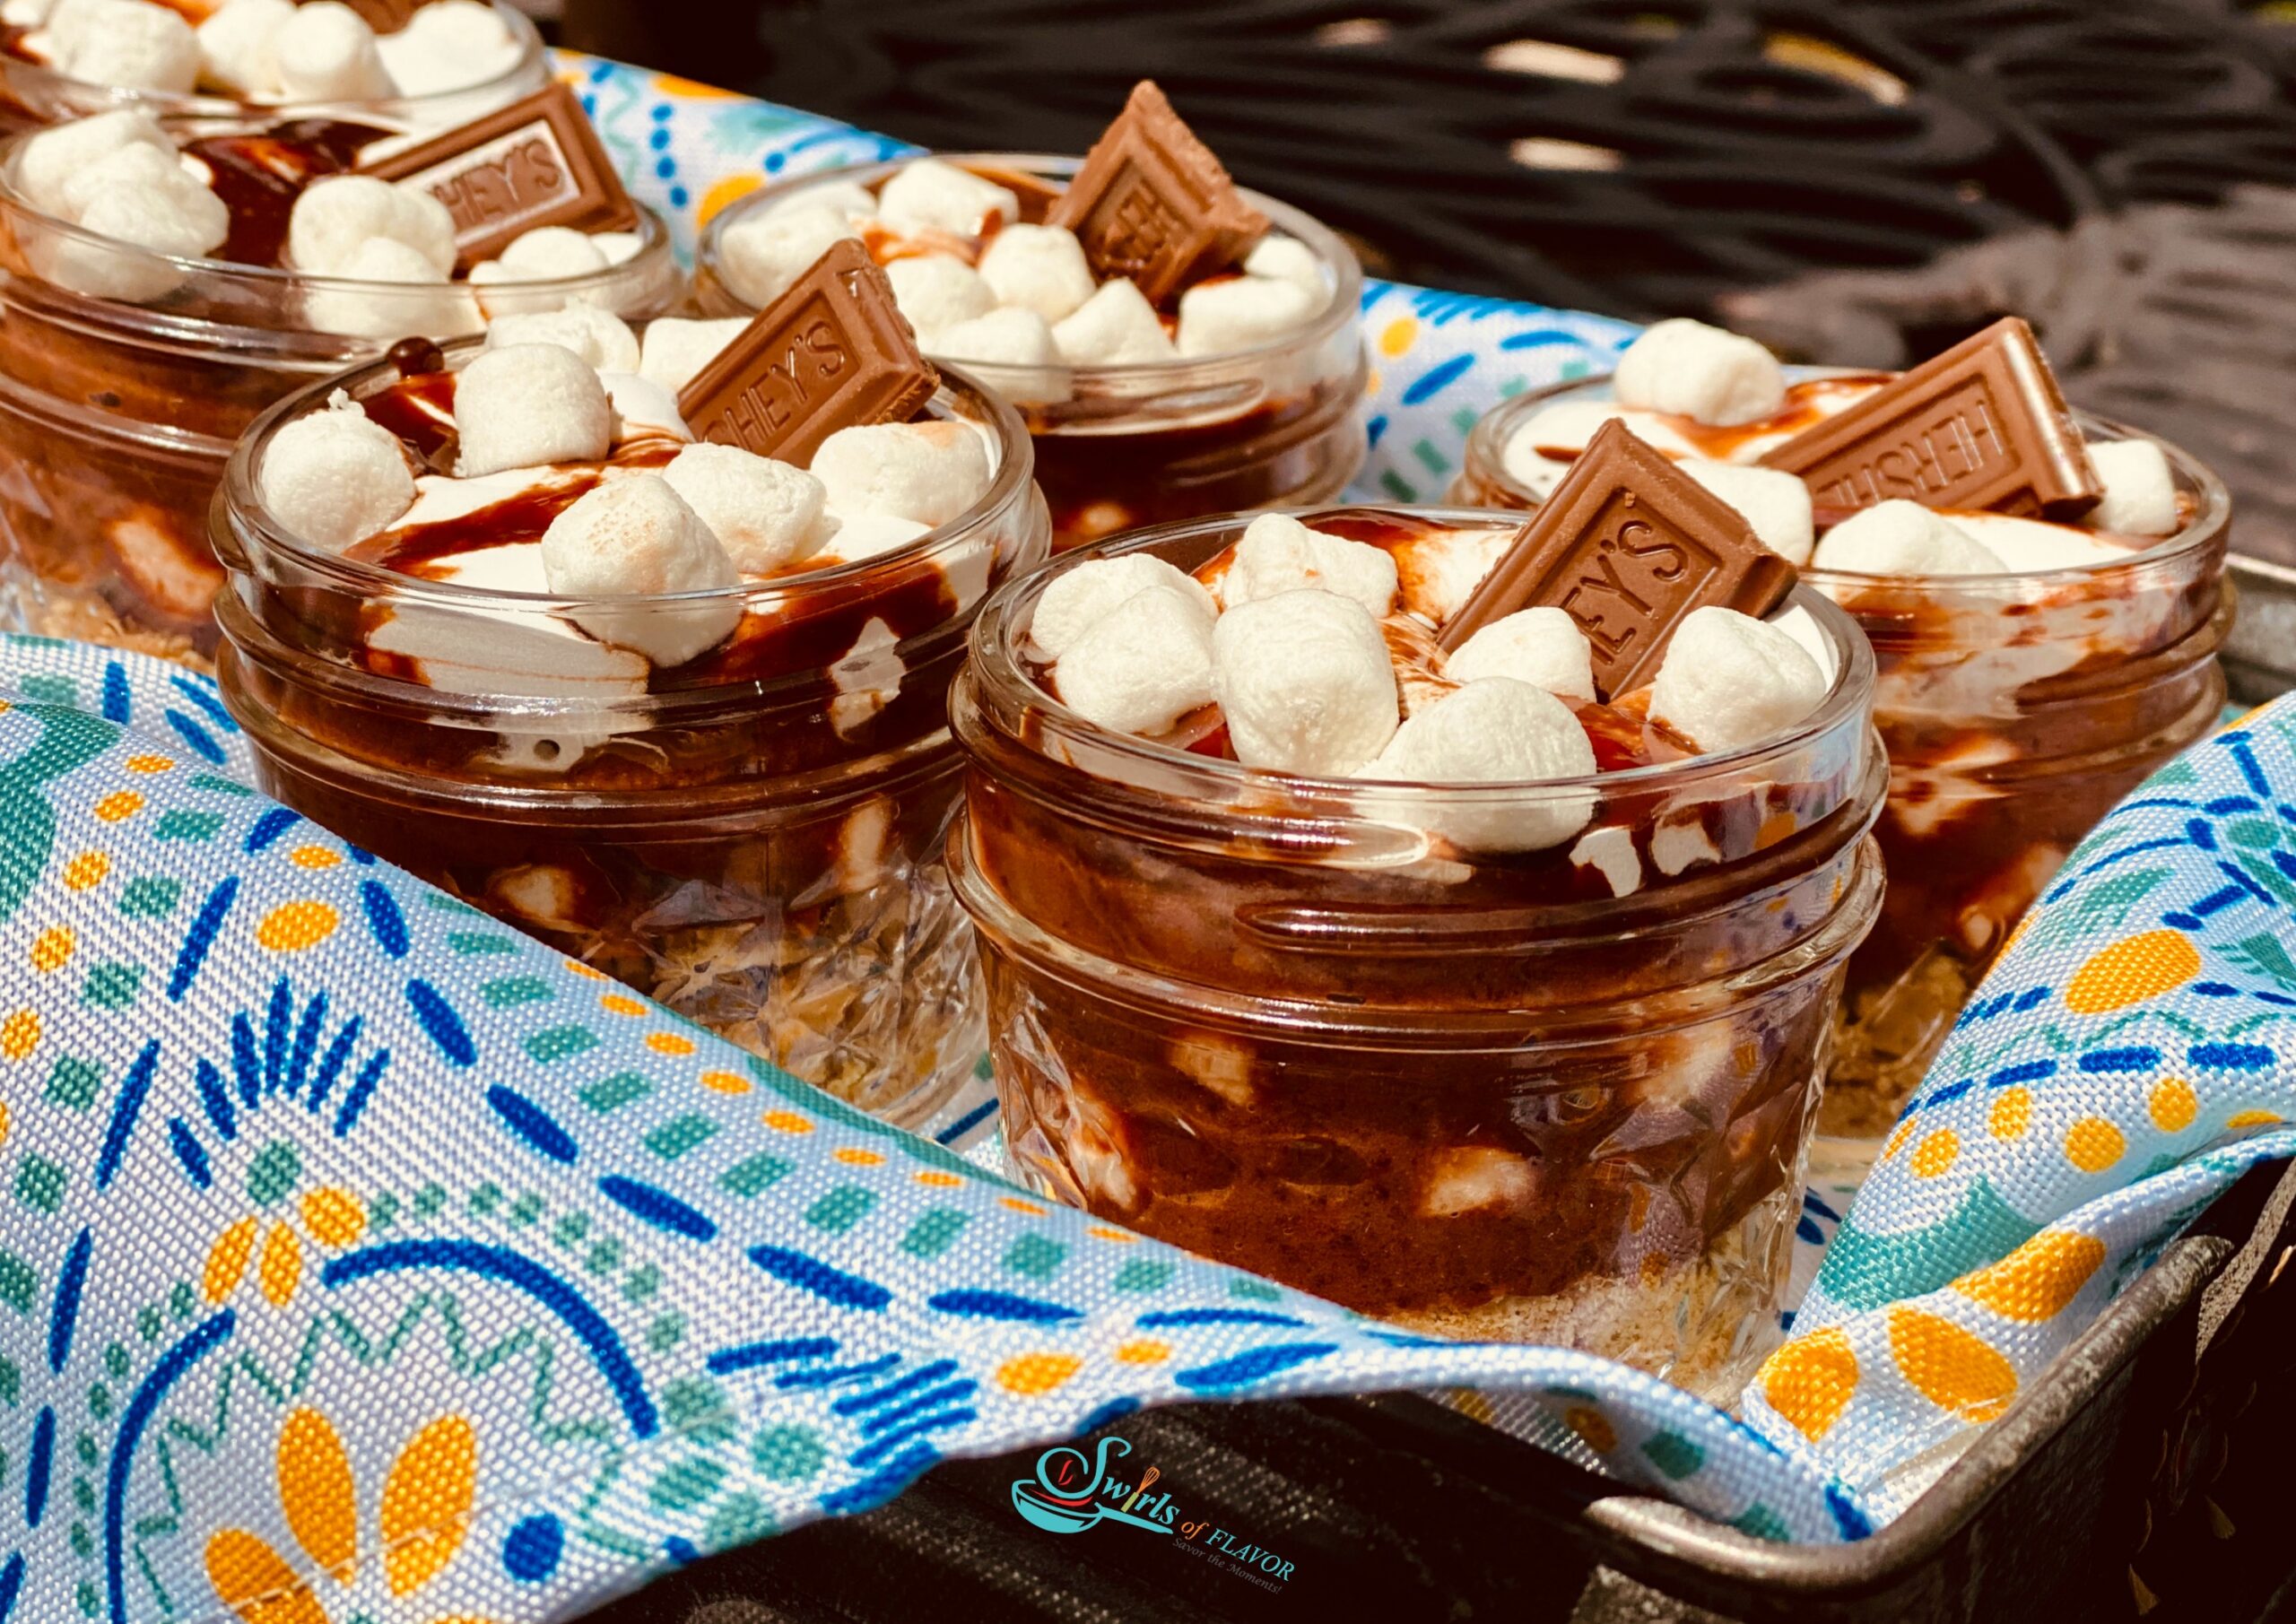 S'mores pudding jars in basket with napkin